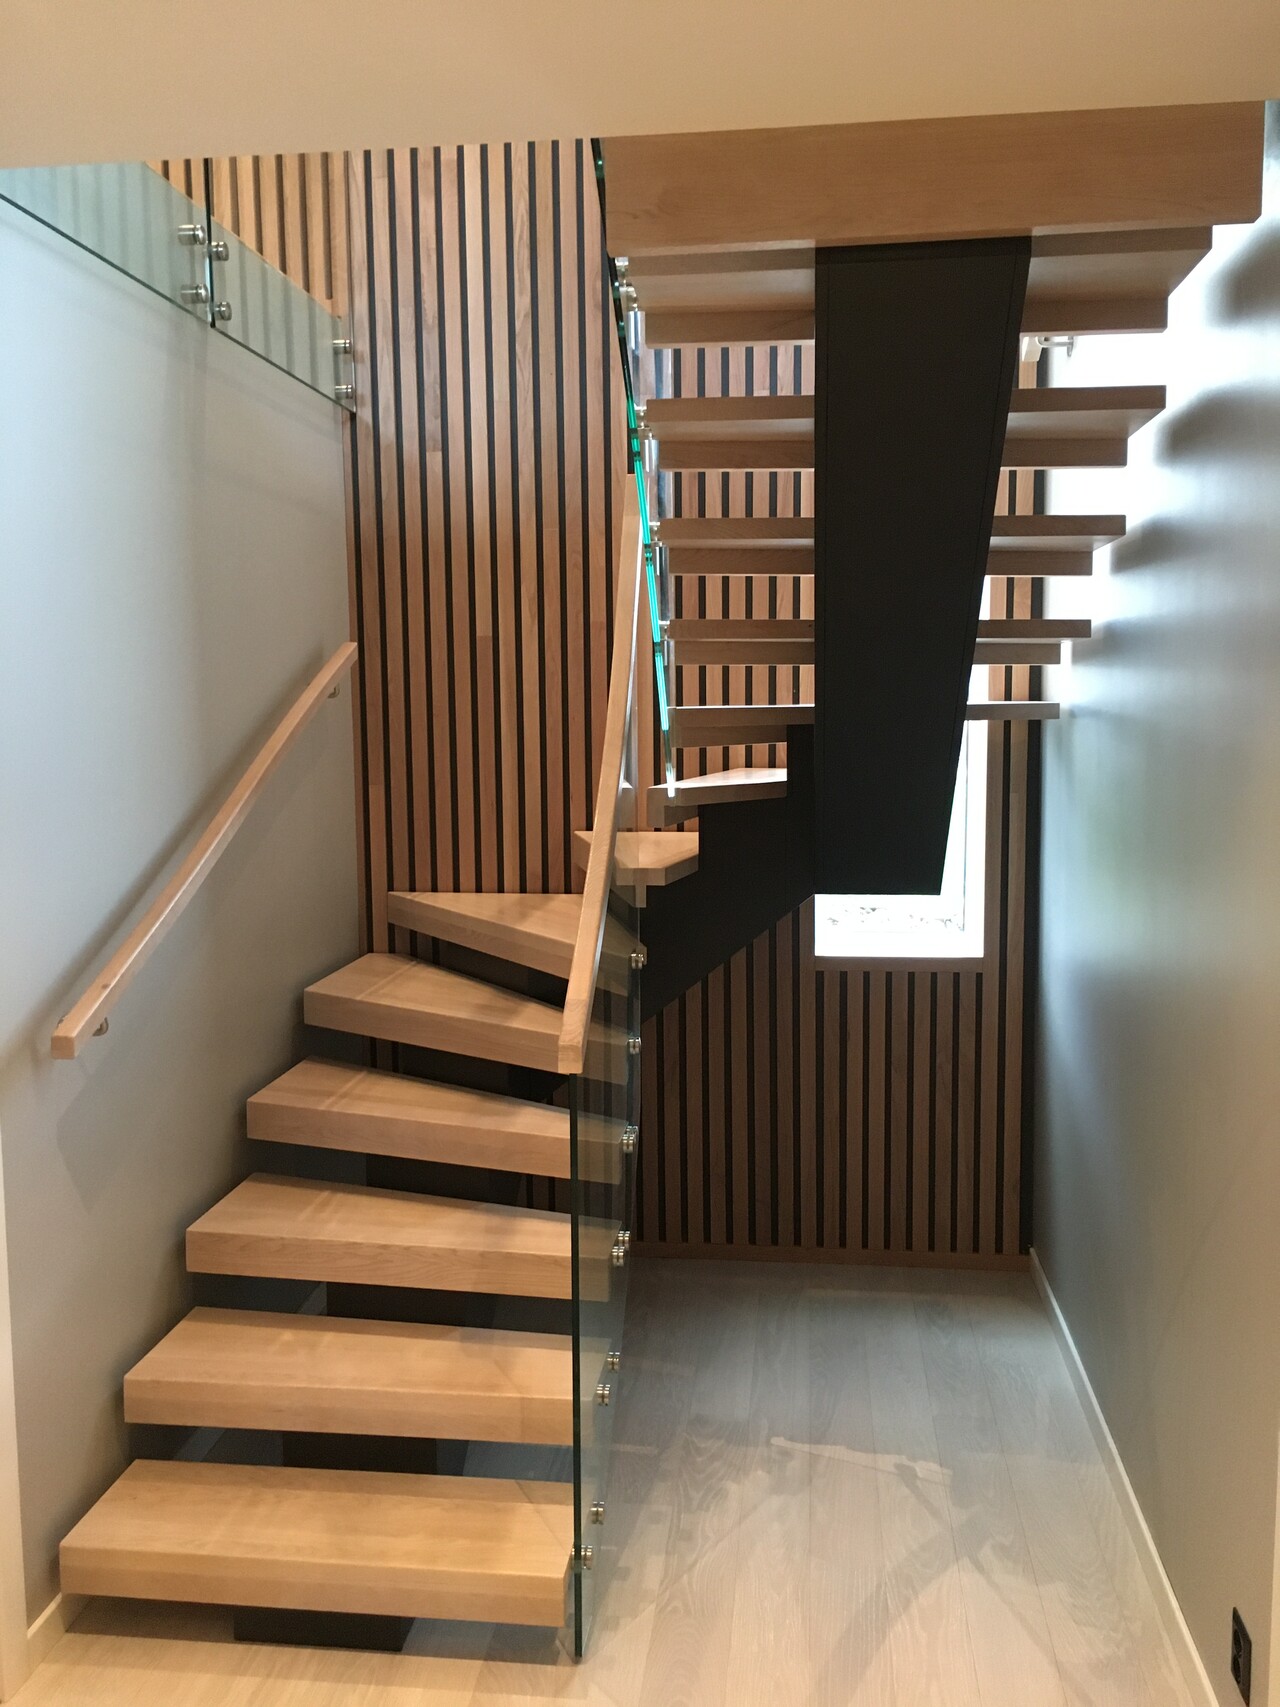 18. Wooden U-shaped staircase with a central beam and a glass railings